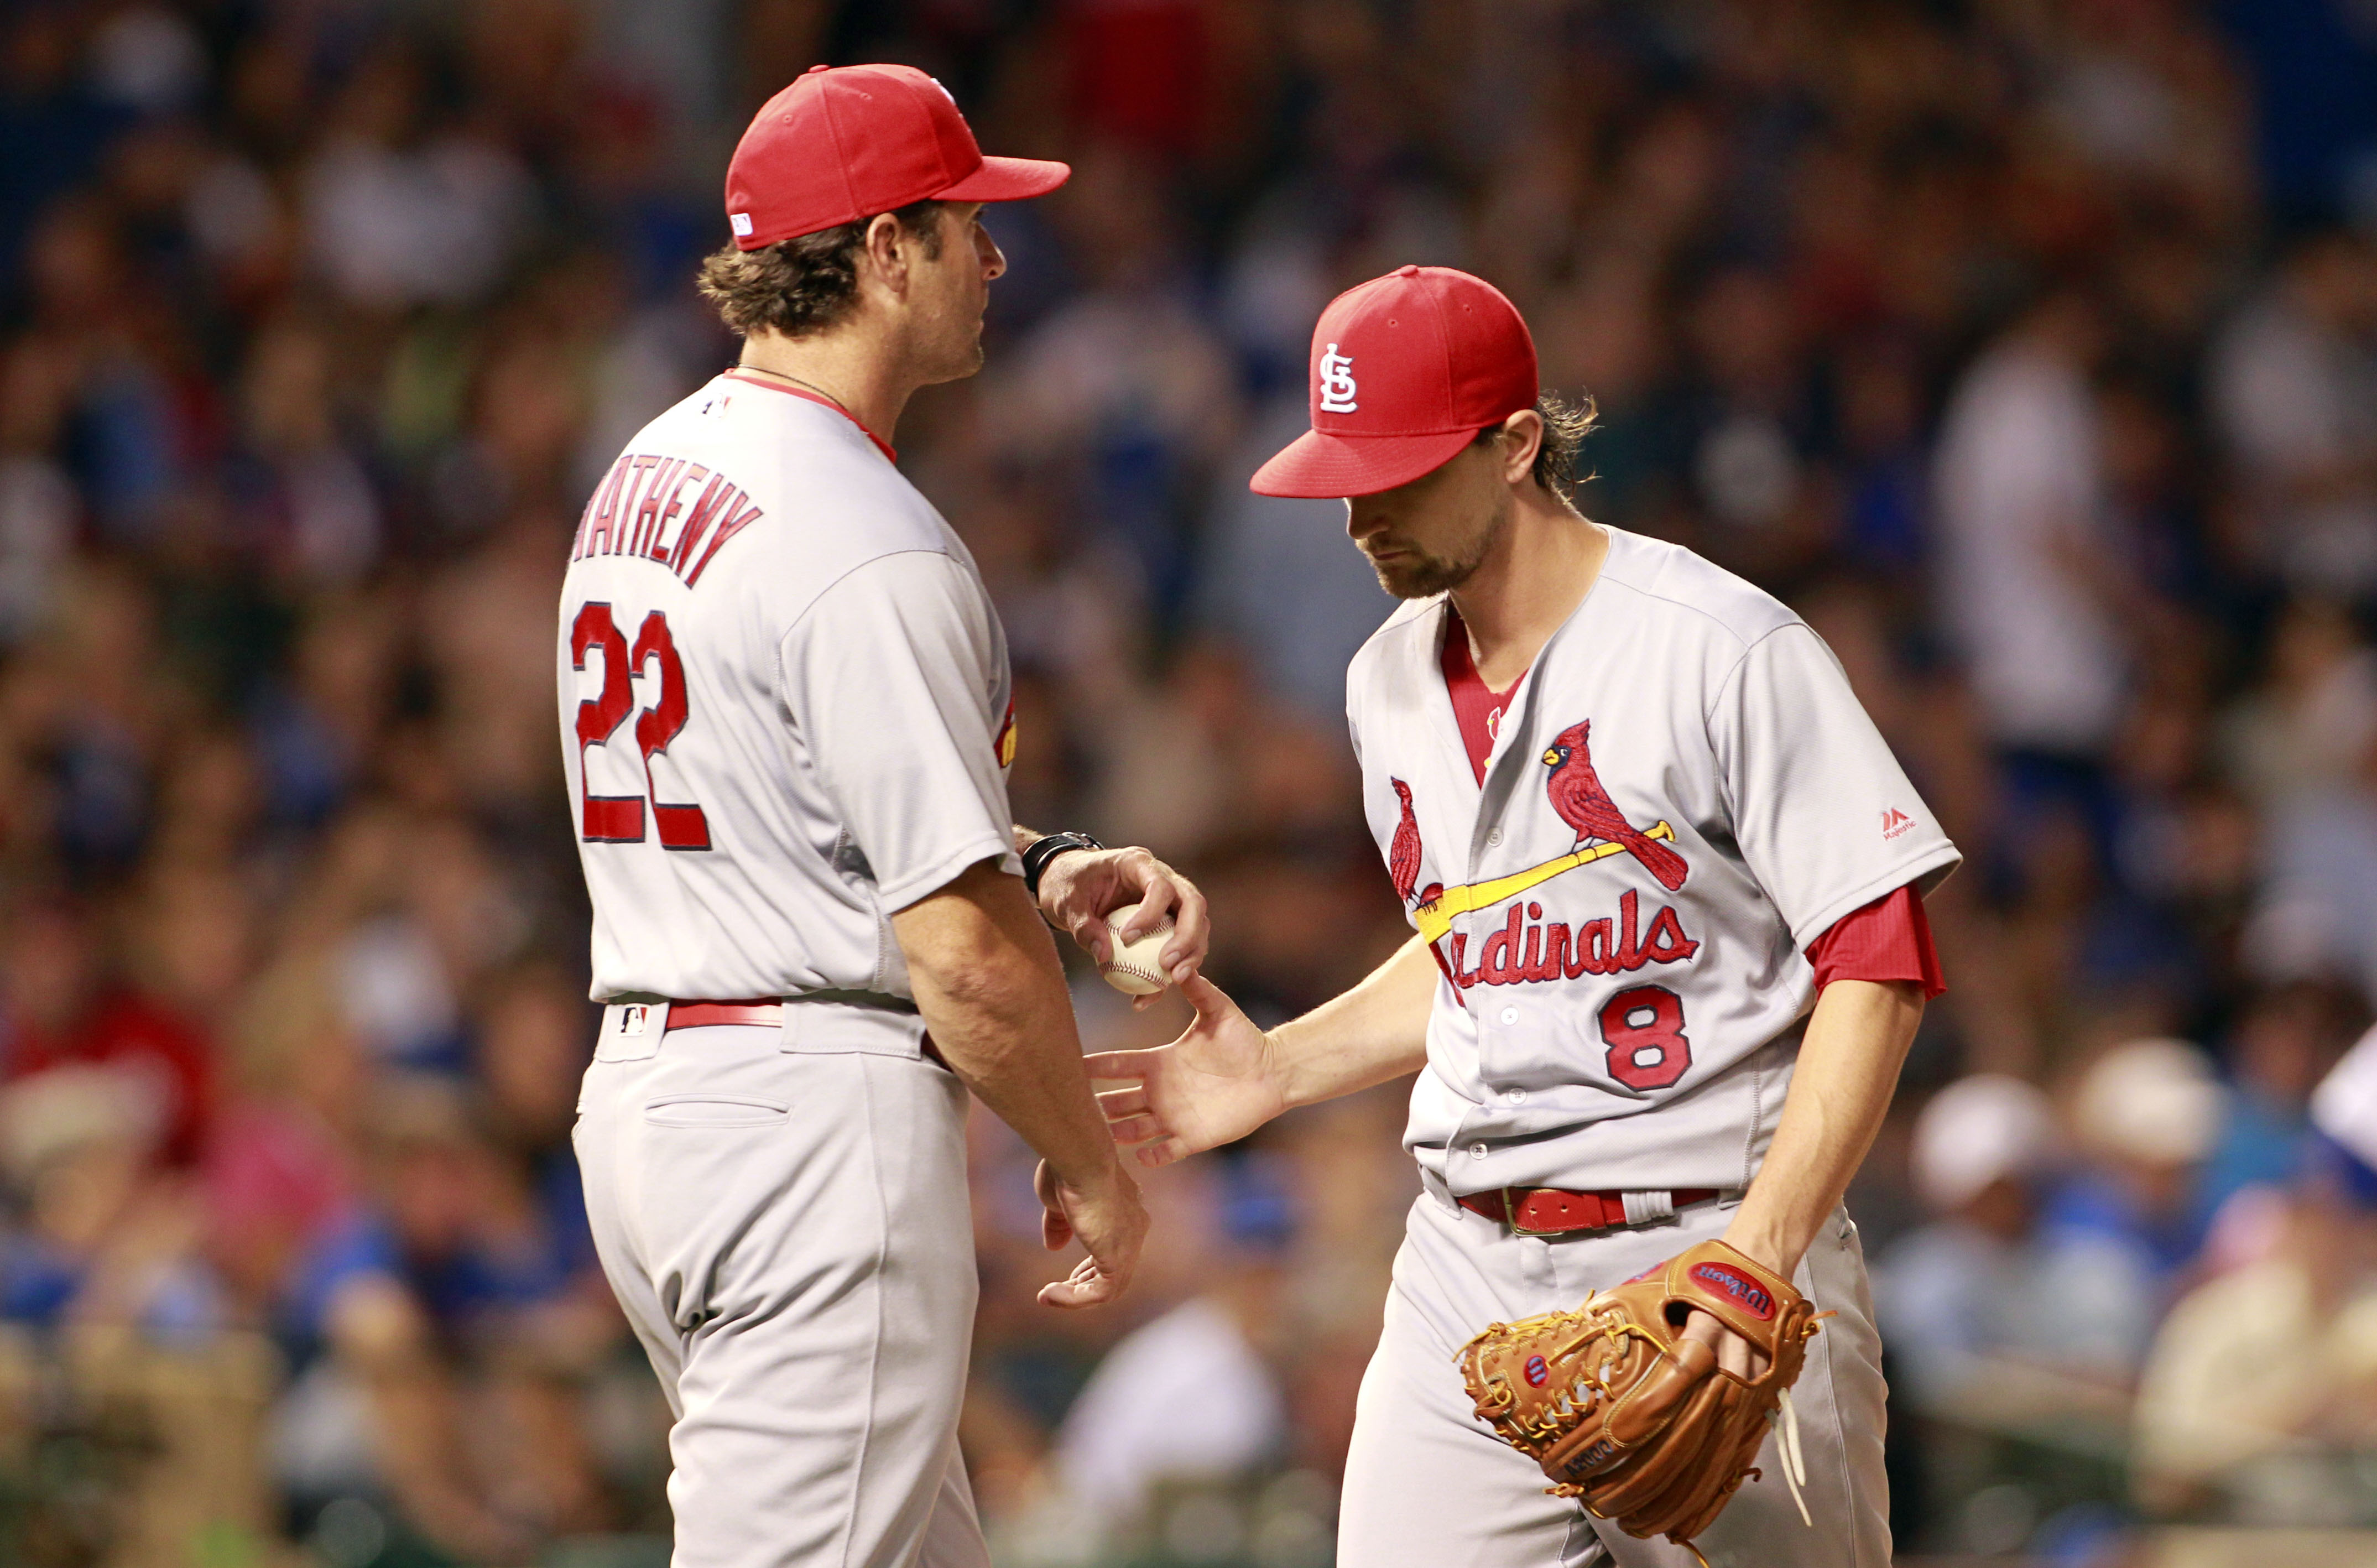 St. Louis Cardinals: Contact Quality Against Mike Leake